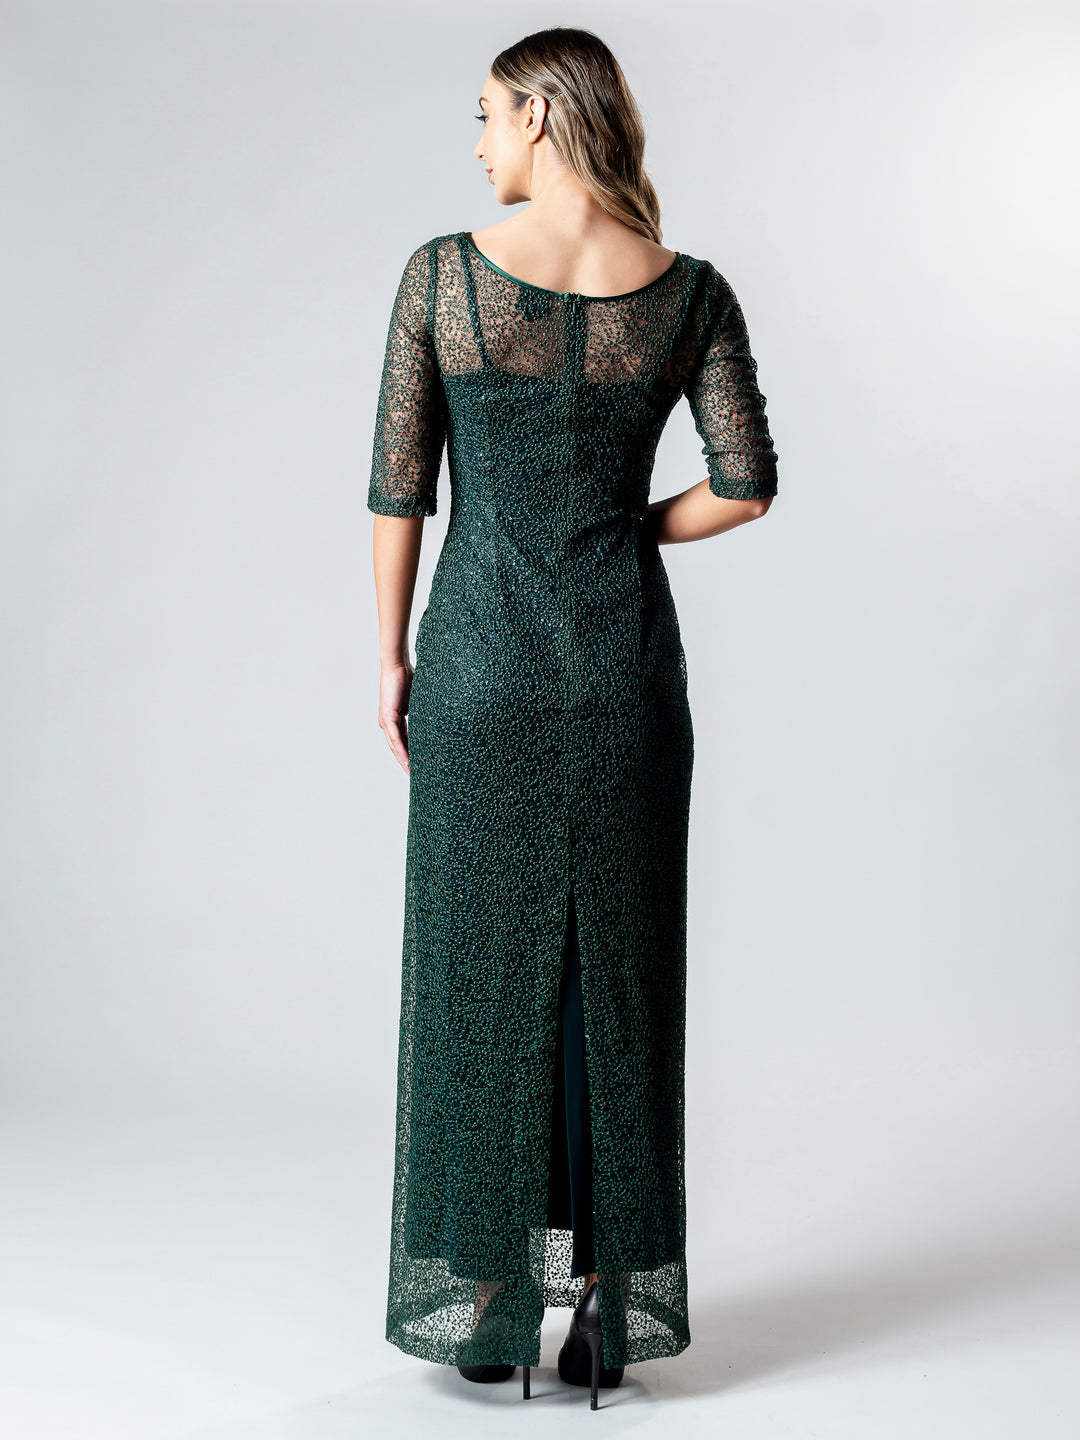 EMERALD 3/4 Sleeve Evening Gown